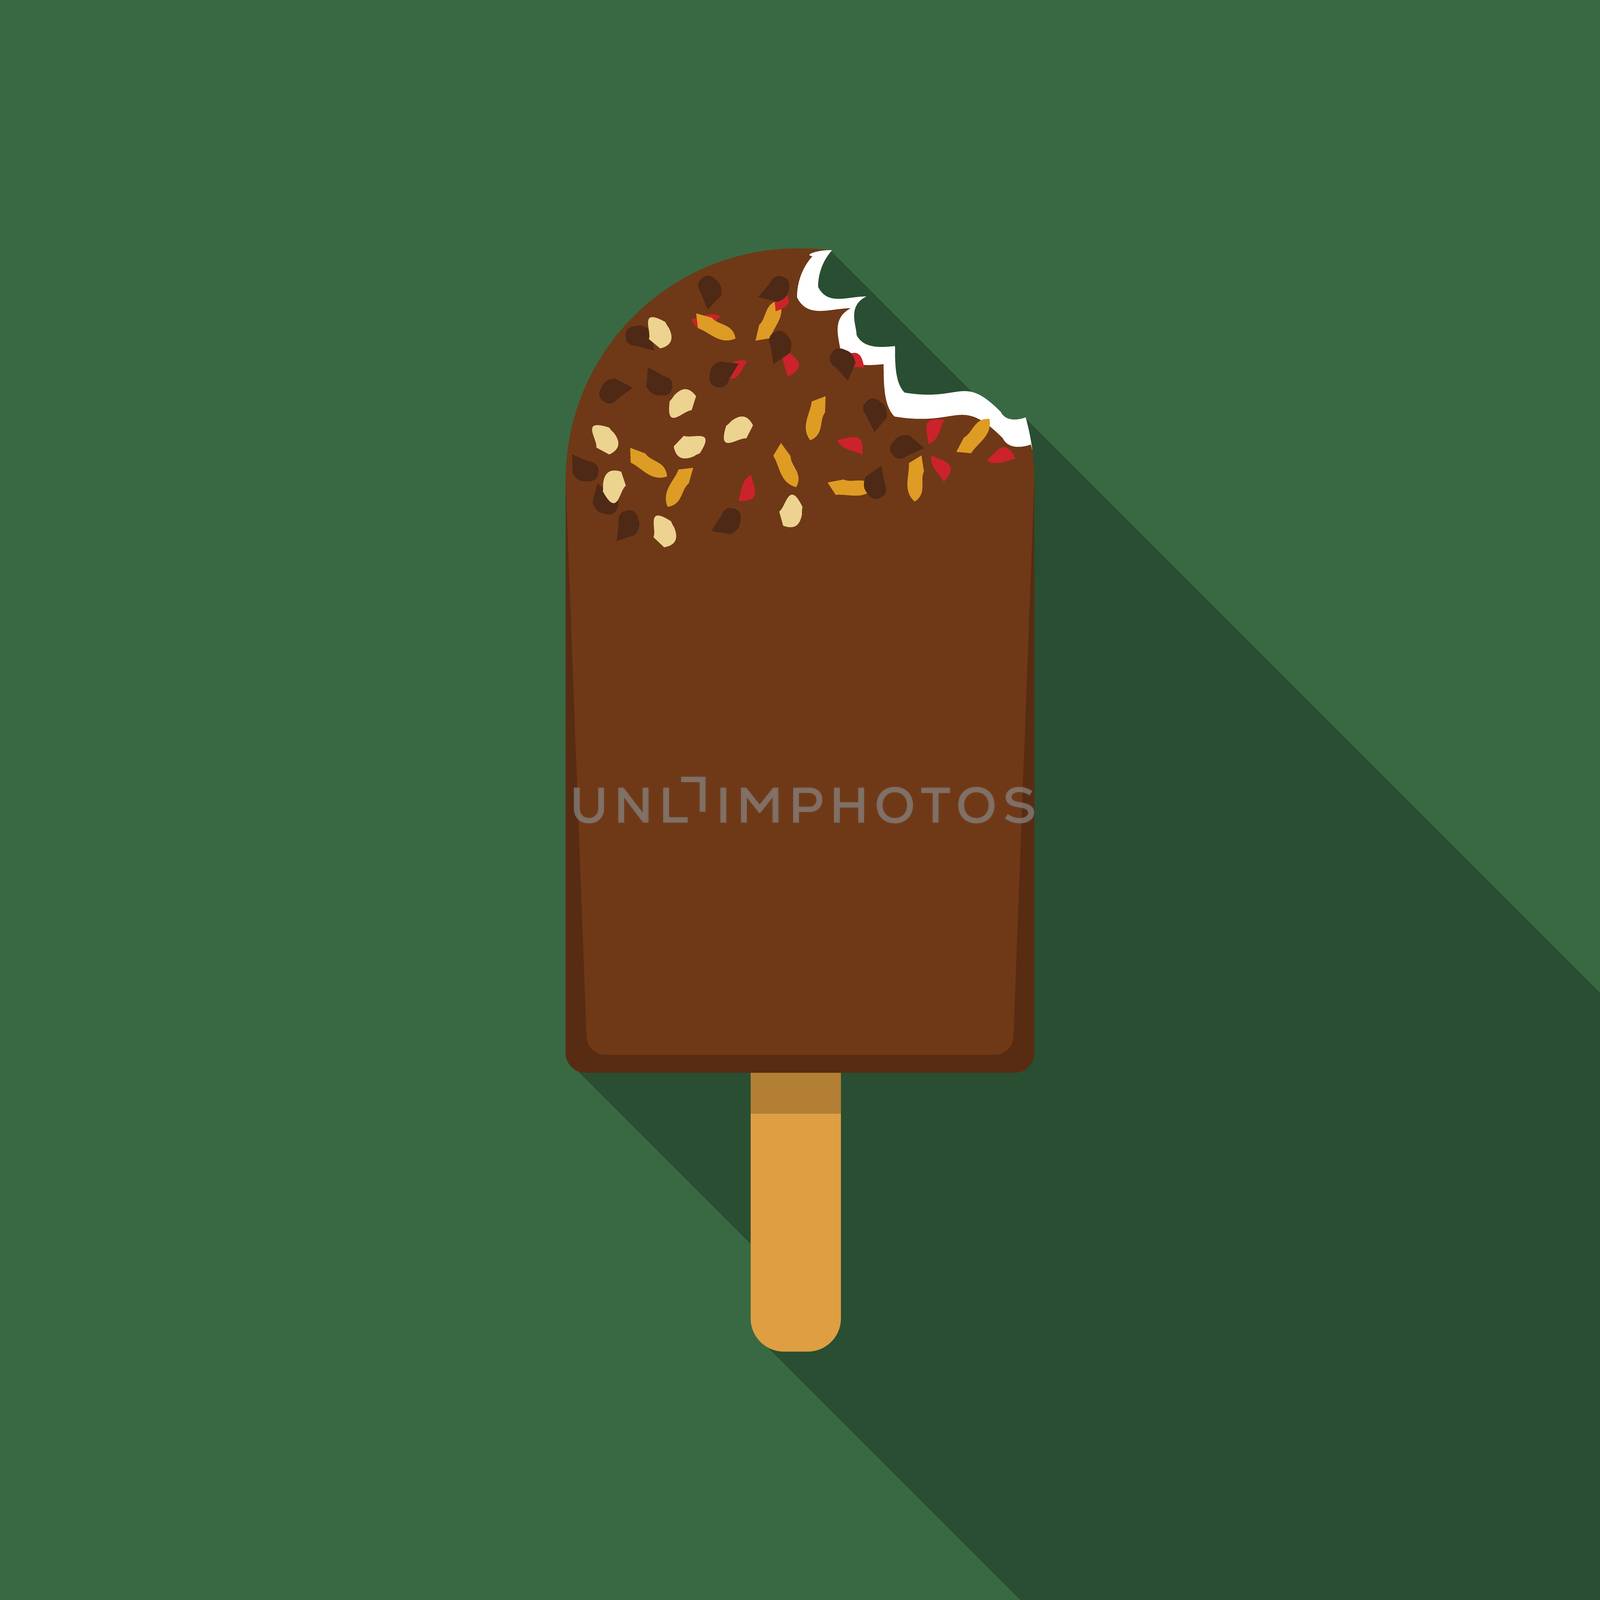 Flat design vector icecream icon with long shadowFlat design vector vinyl record icon with long shadow by Lemon_workshop